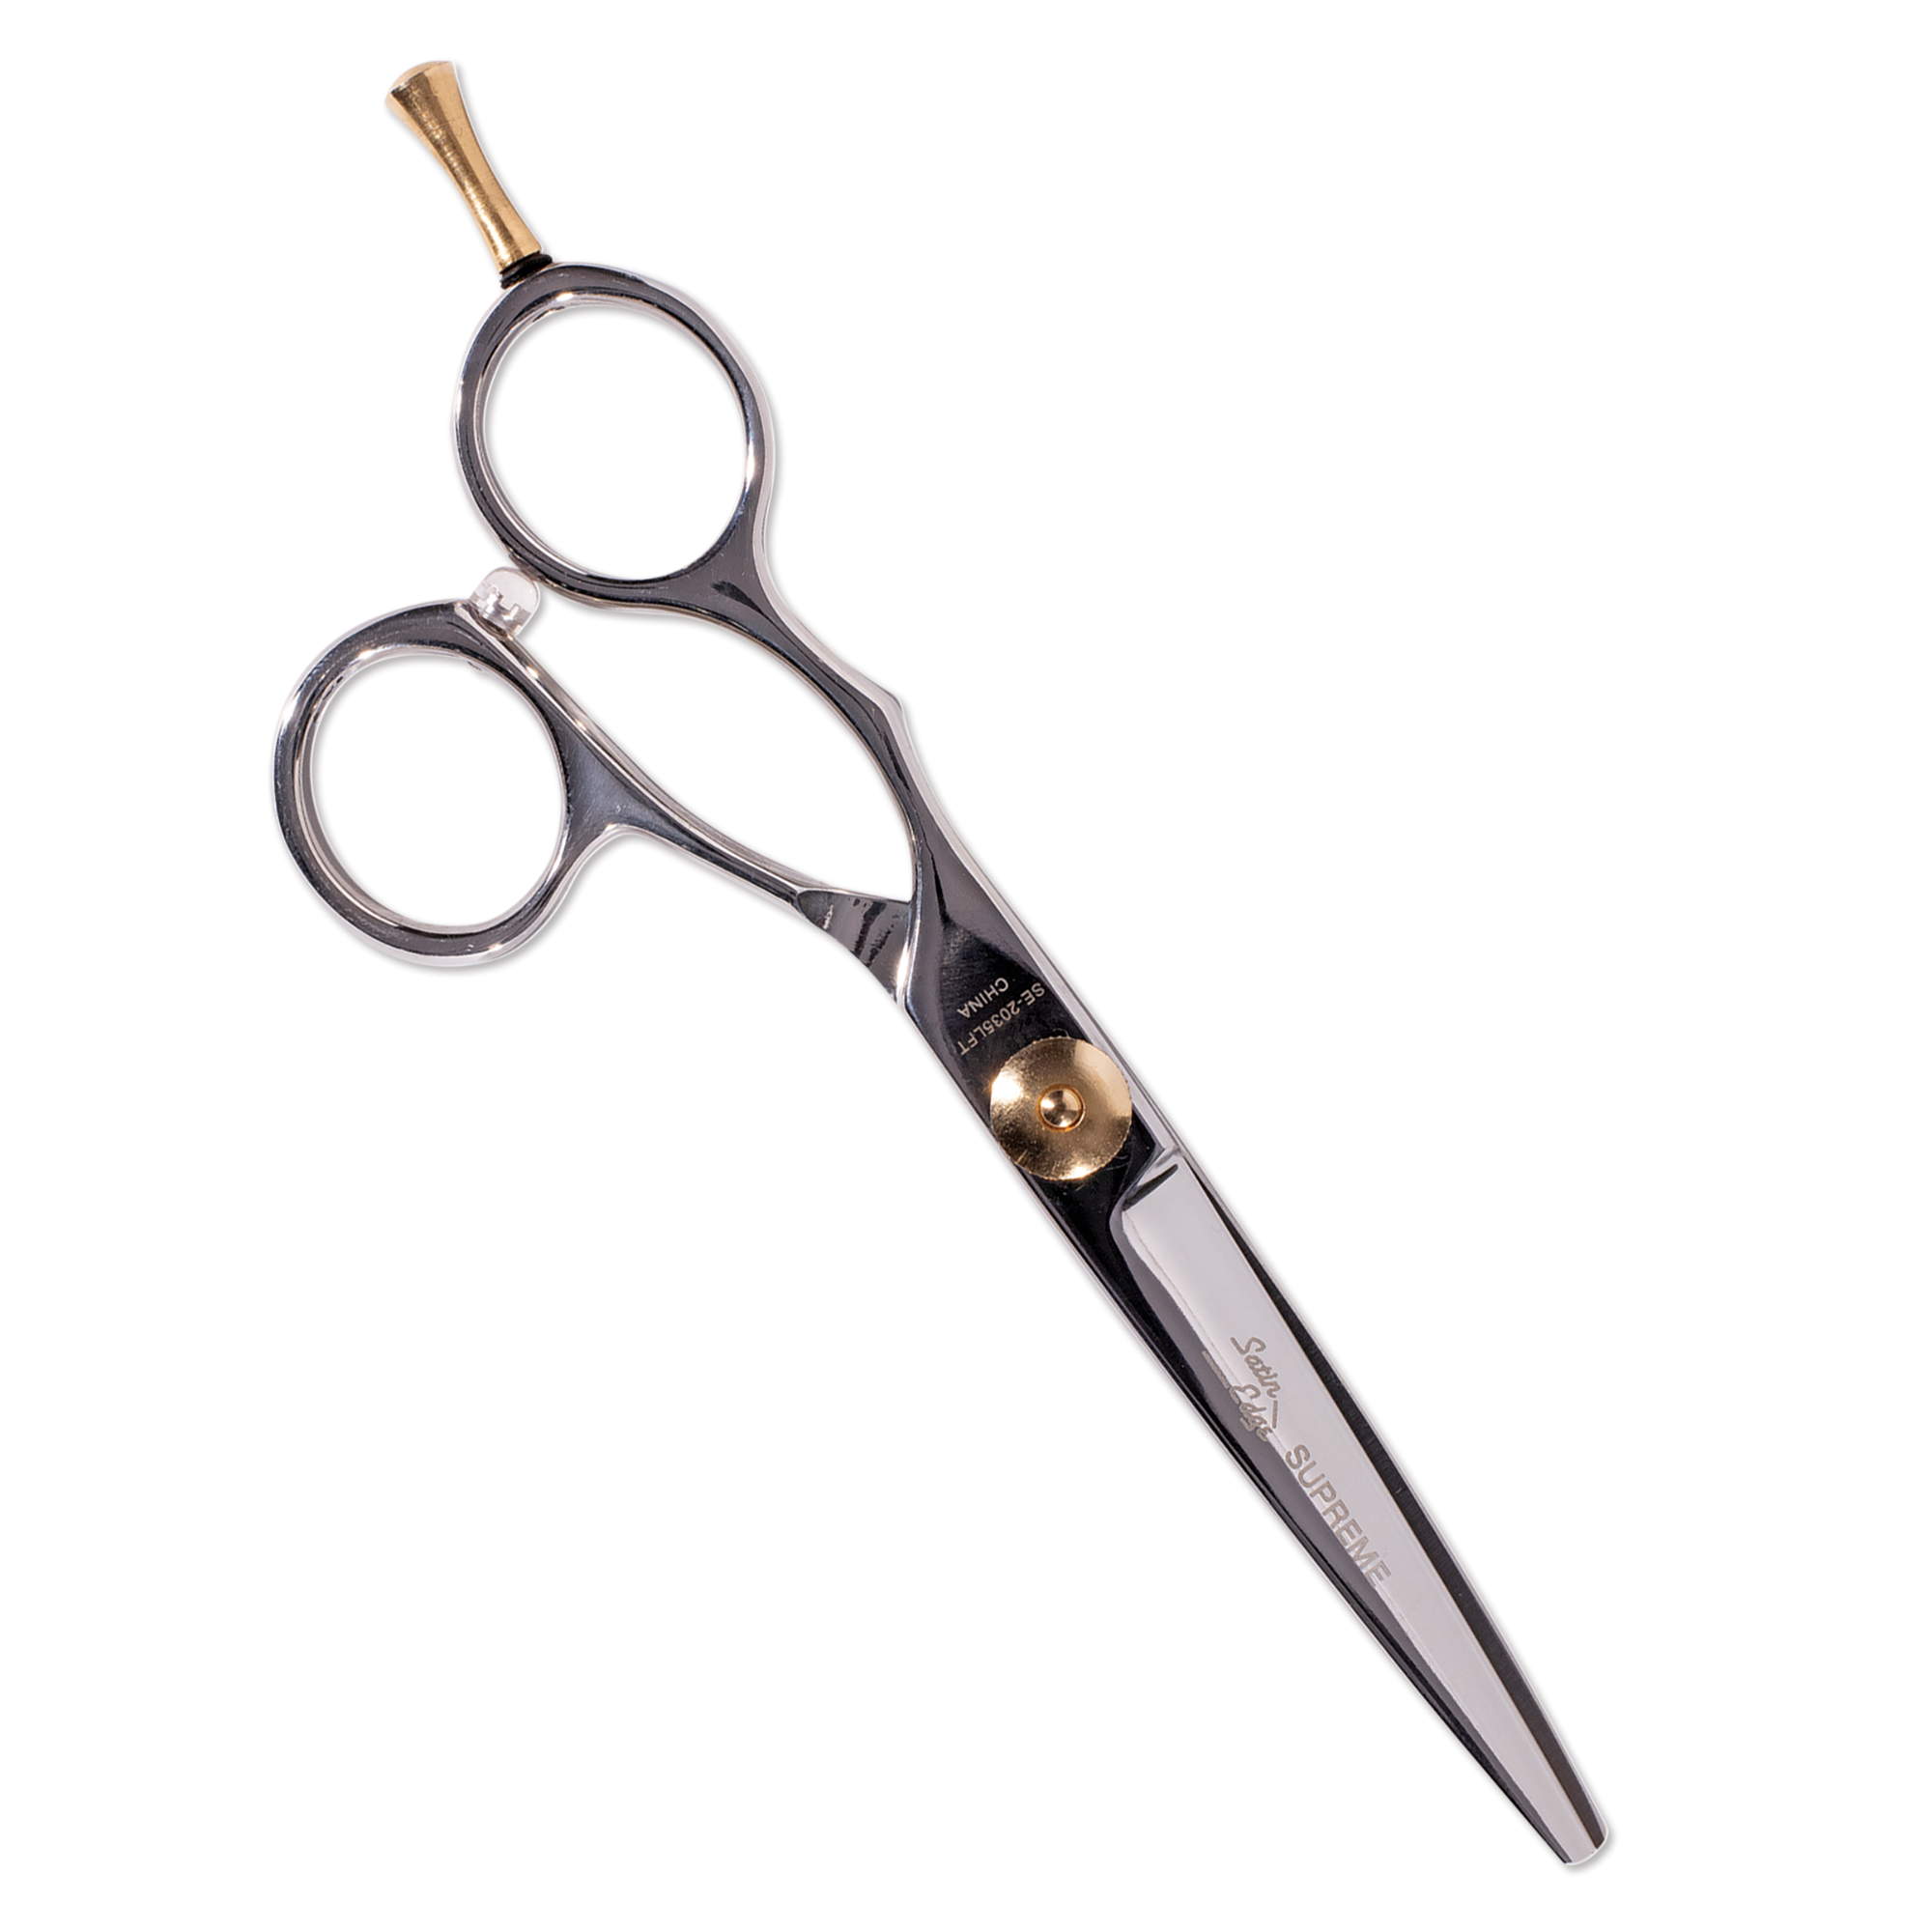 5-1/2" Supreme Stainless Steel Cutting Shear, Lefty